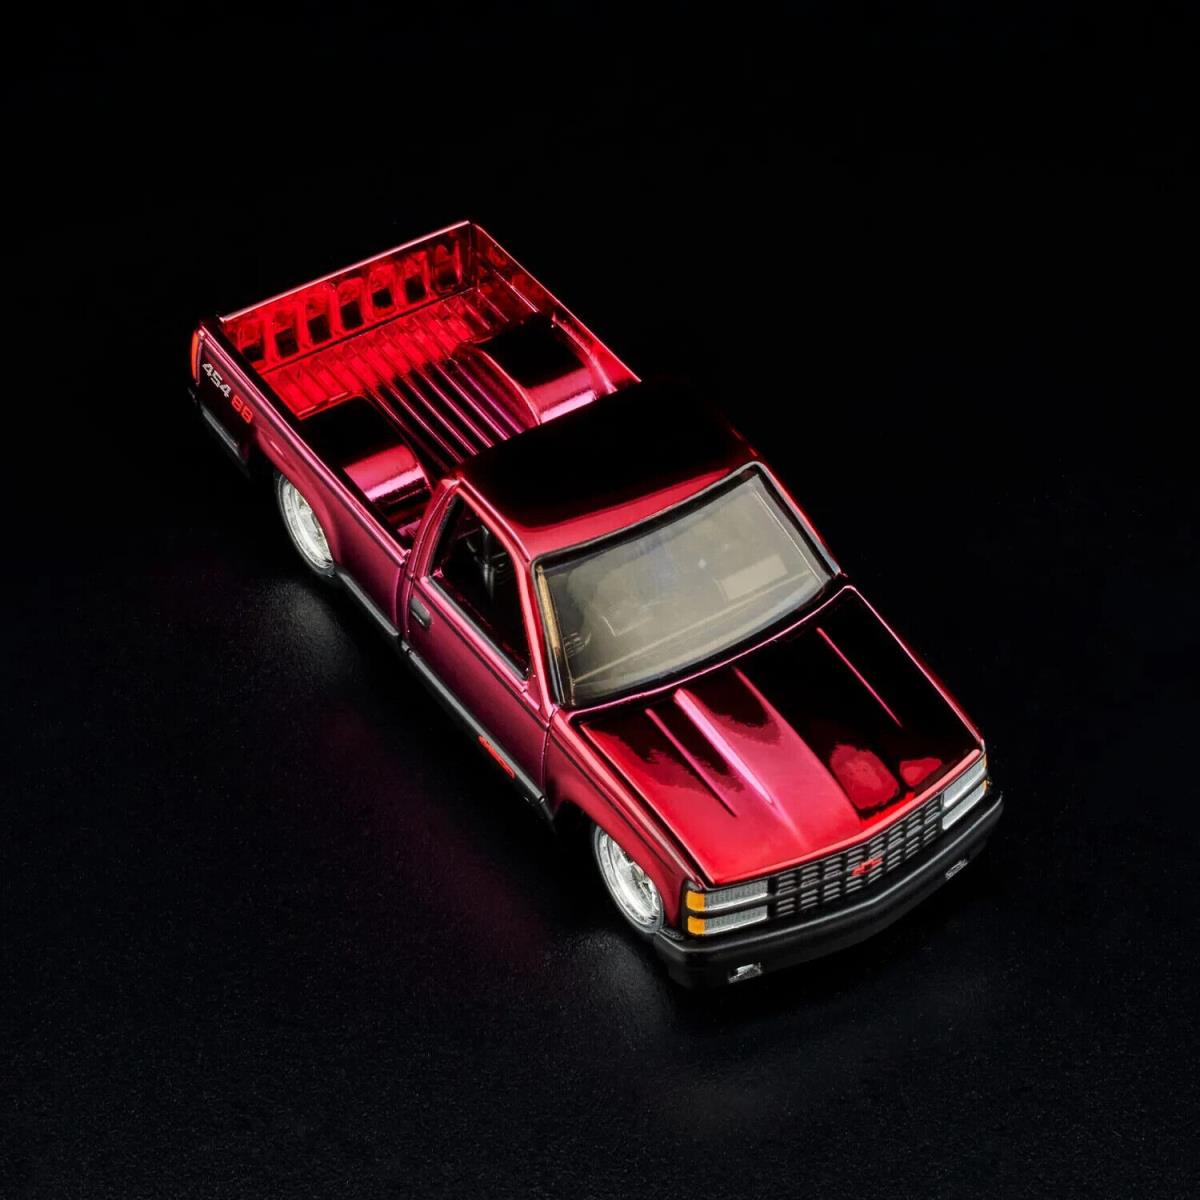 Hot Wheels toy Chevy - Red